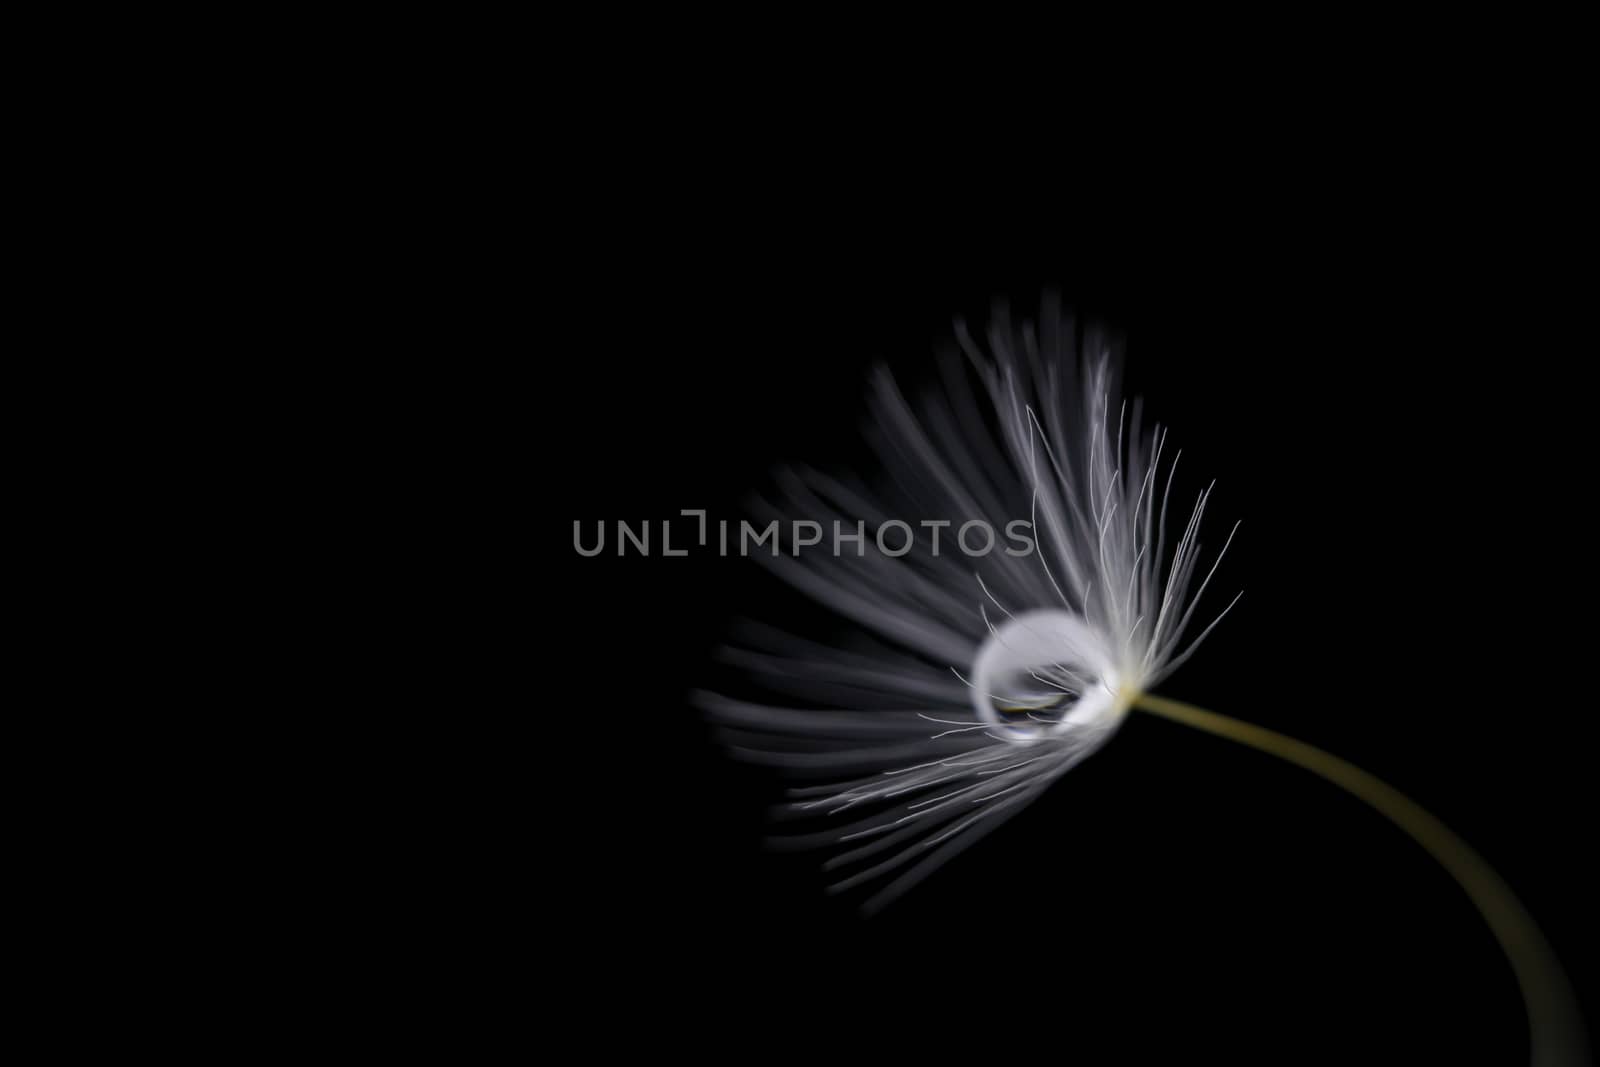 a single dandelion seed with a water droplet inside